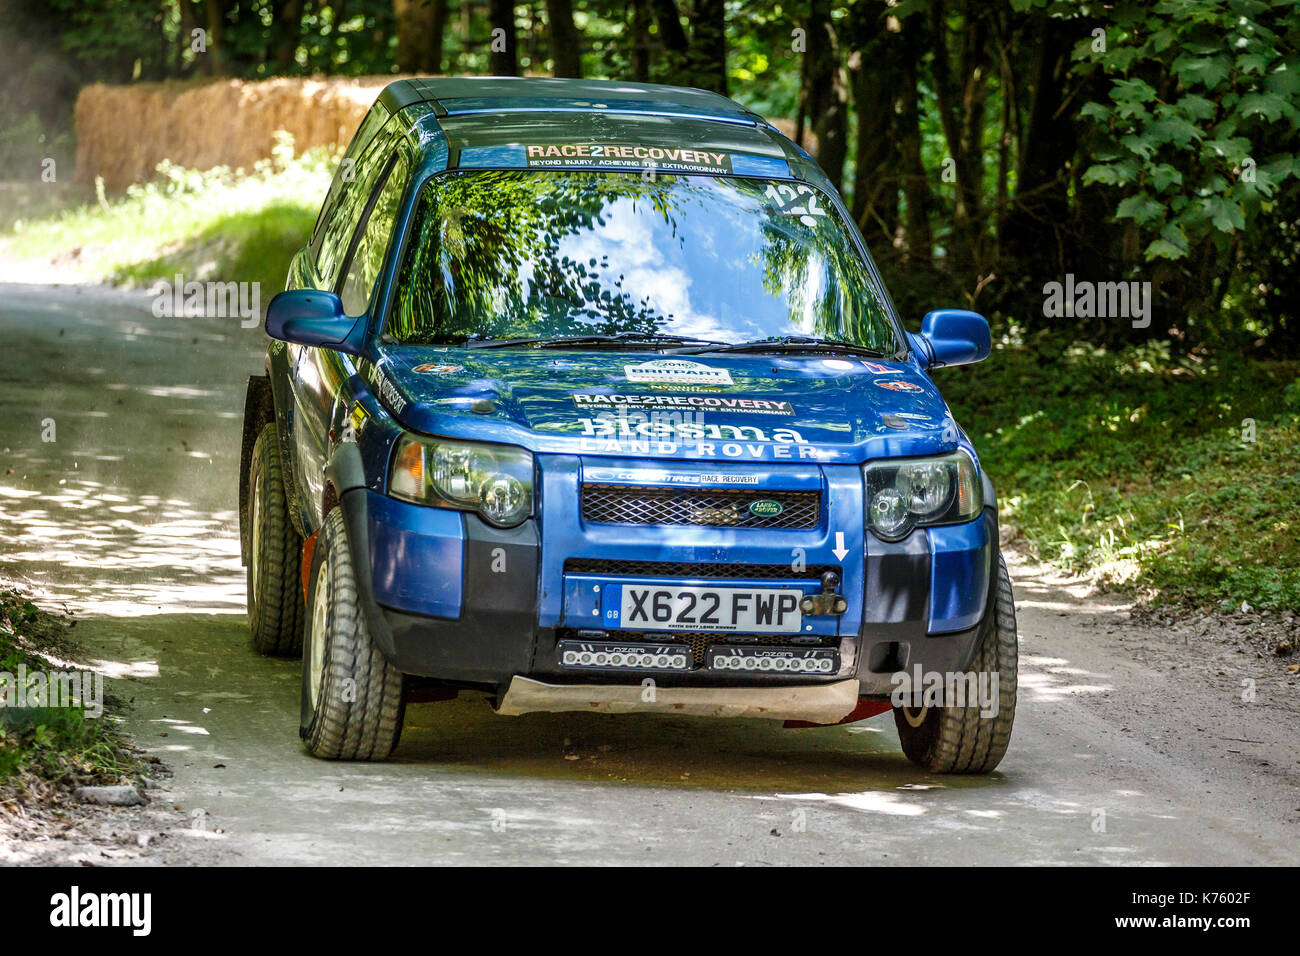 2001 Race2Recovery Land Rover Freelander rally car on the forest stage at the 2017 Goodwood Festival of Speed, Sussex, UK. Stock Photo